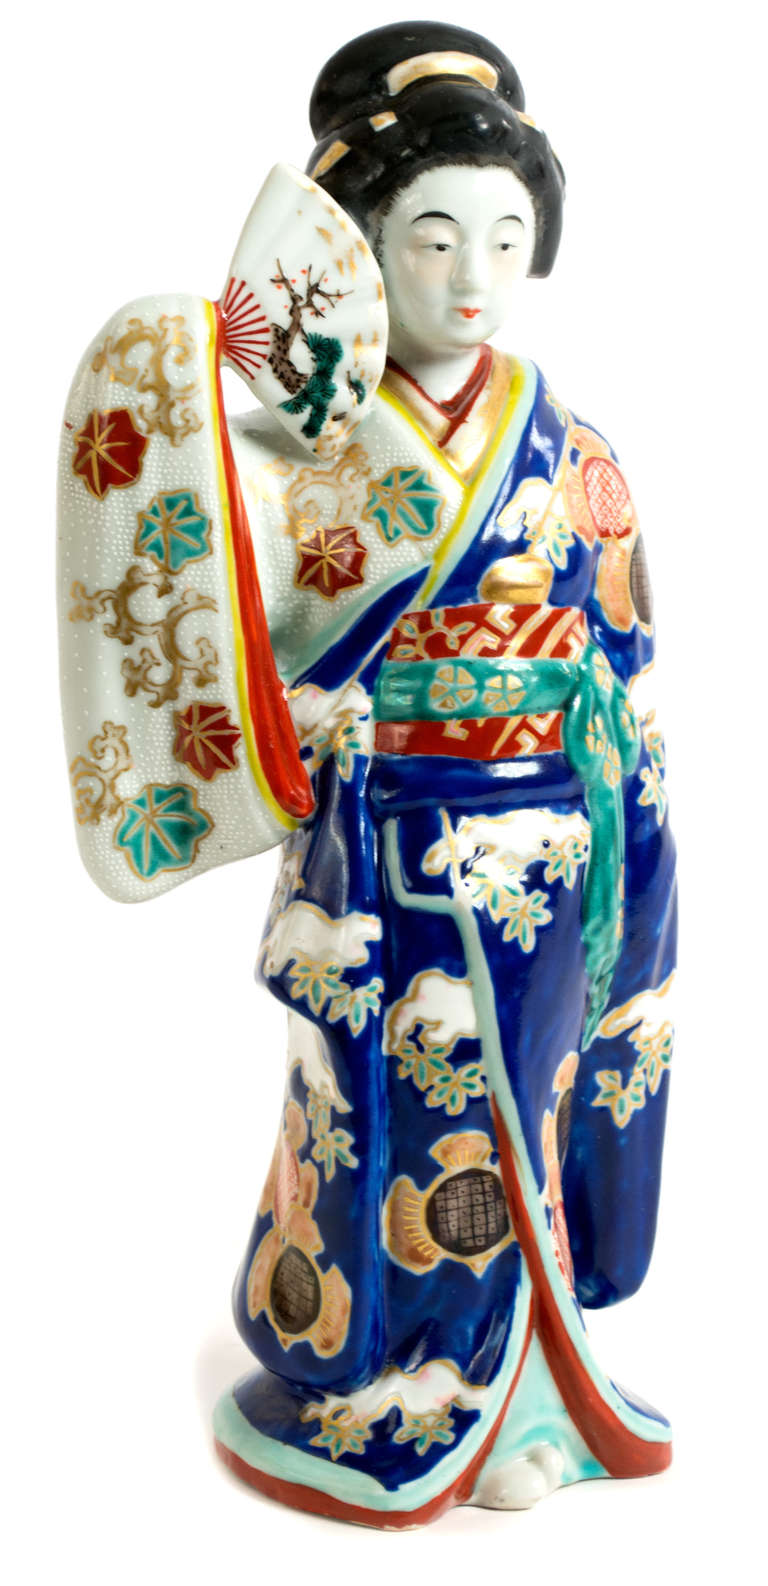 Beautifully gilt and painted with brilliant blues, reds, and greens the robes of this geisha bear the symbols of the Three Friends of Winter and references to the Sacred Gifts.